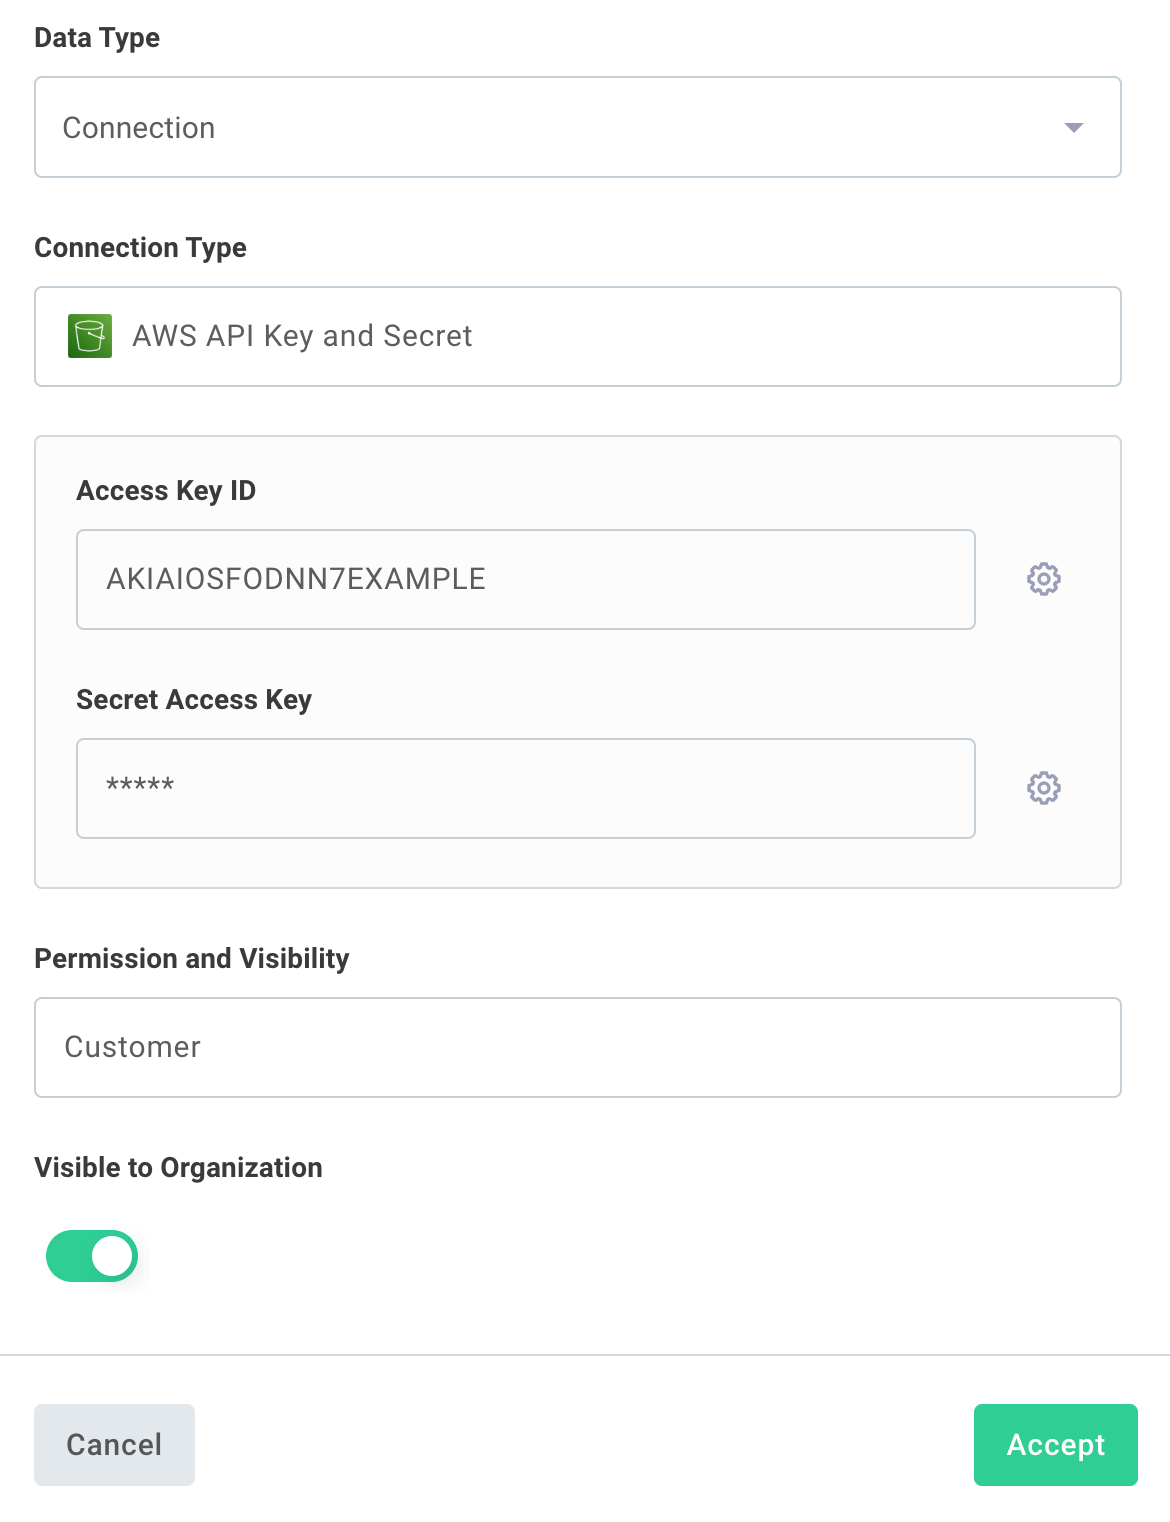 Connection config variables in Prismatic app